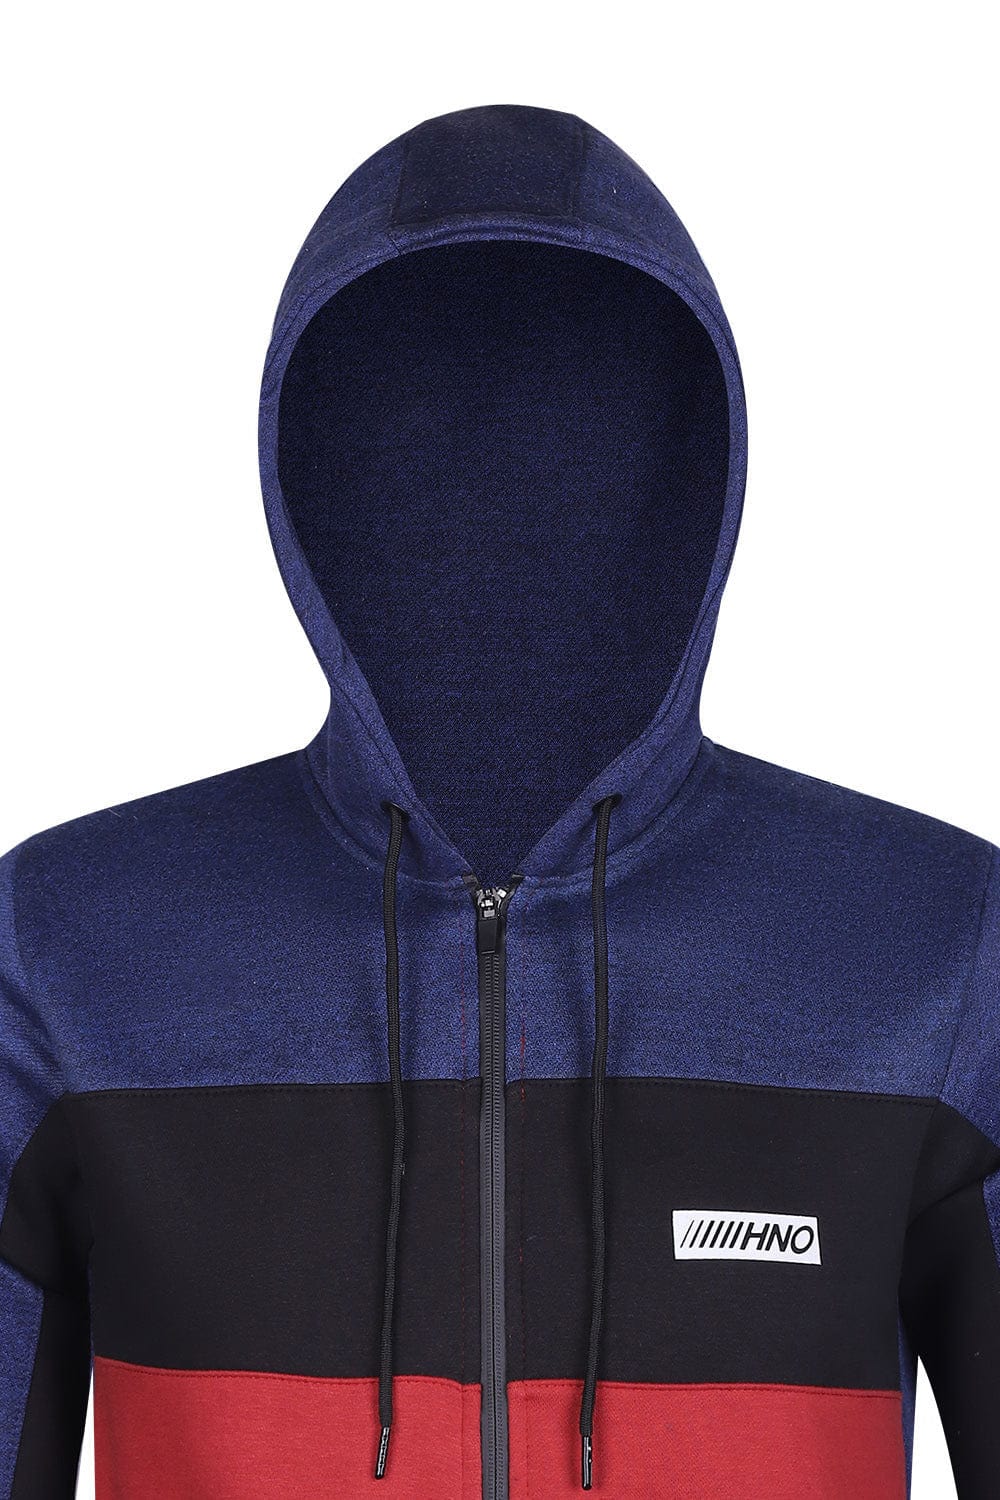 Hope Not Out by Shahid Afridi Men Hoody Zipper Hood with Cut and Sew Panels